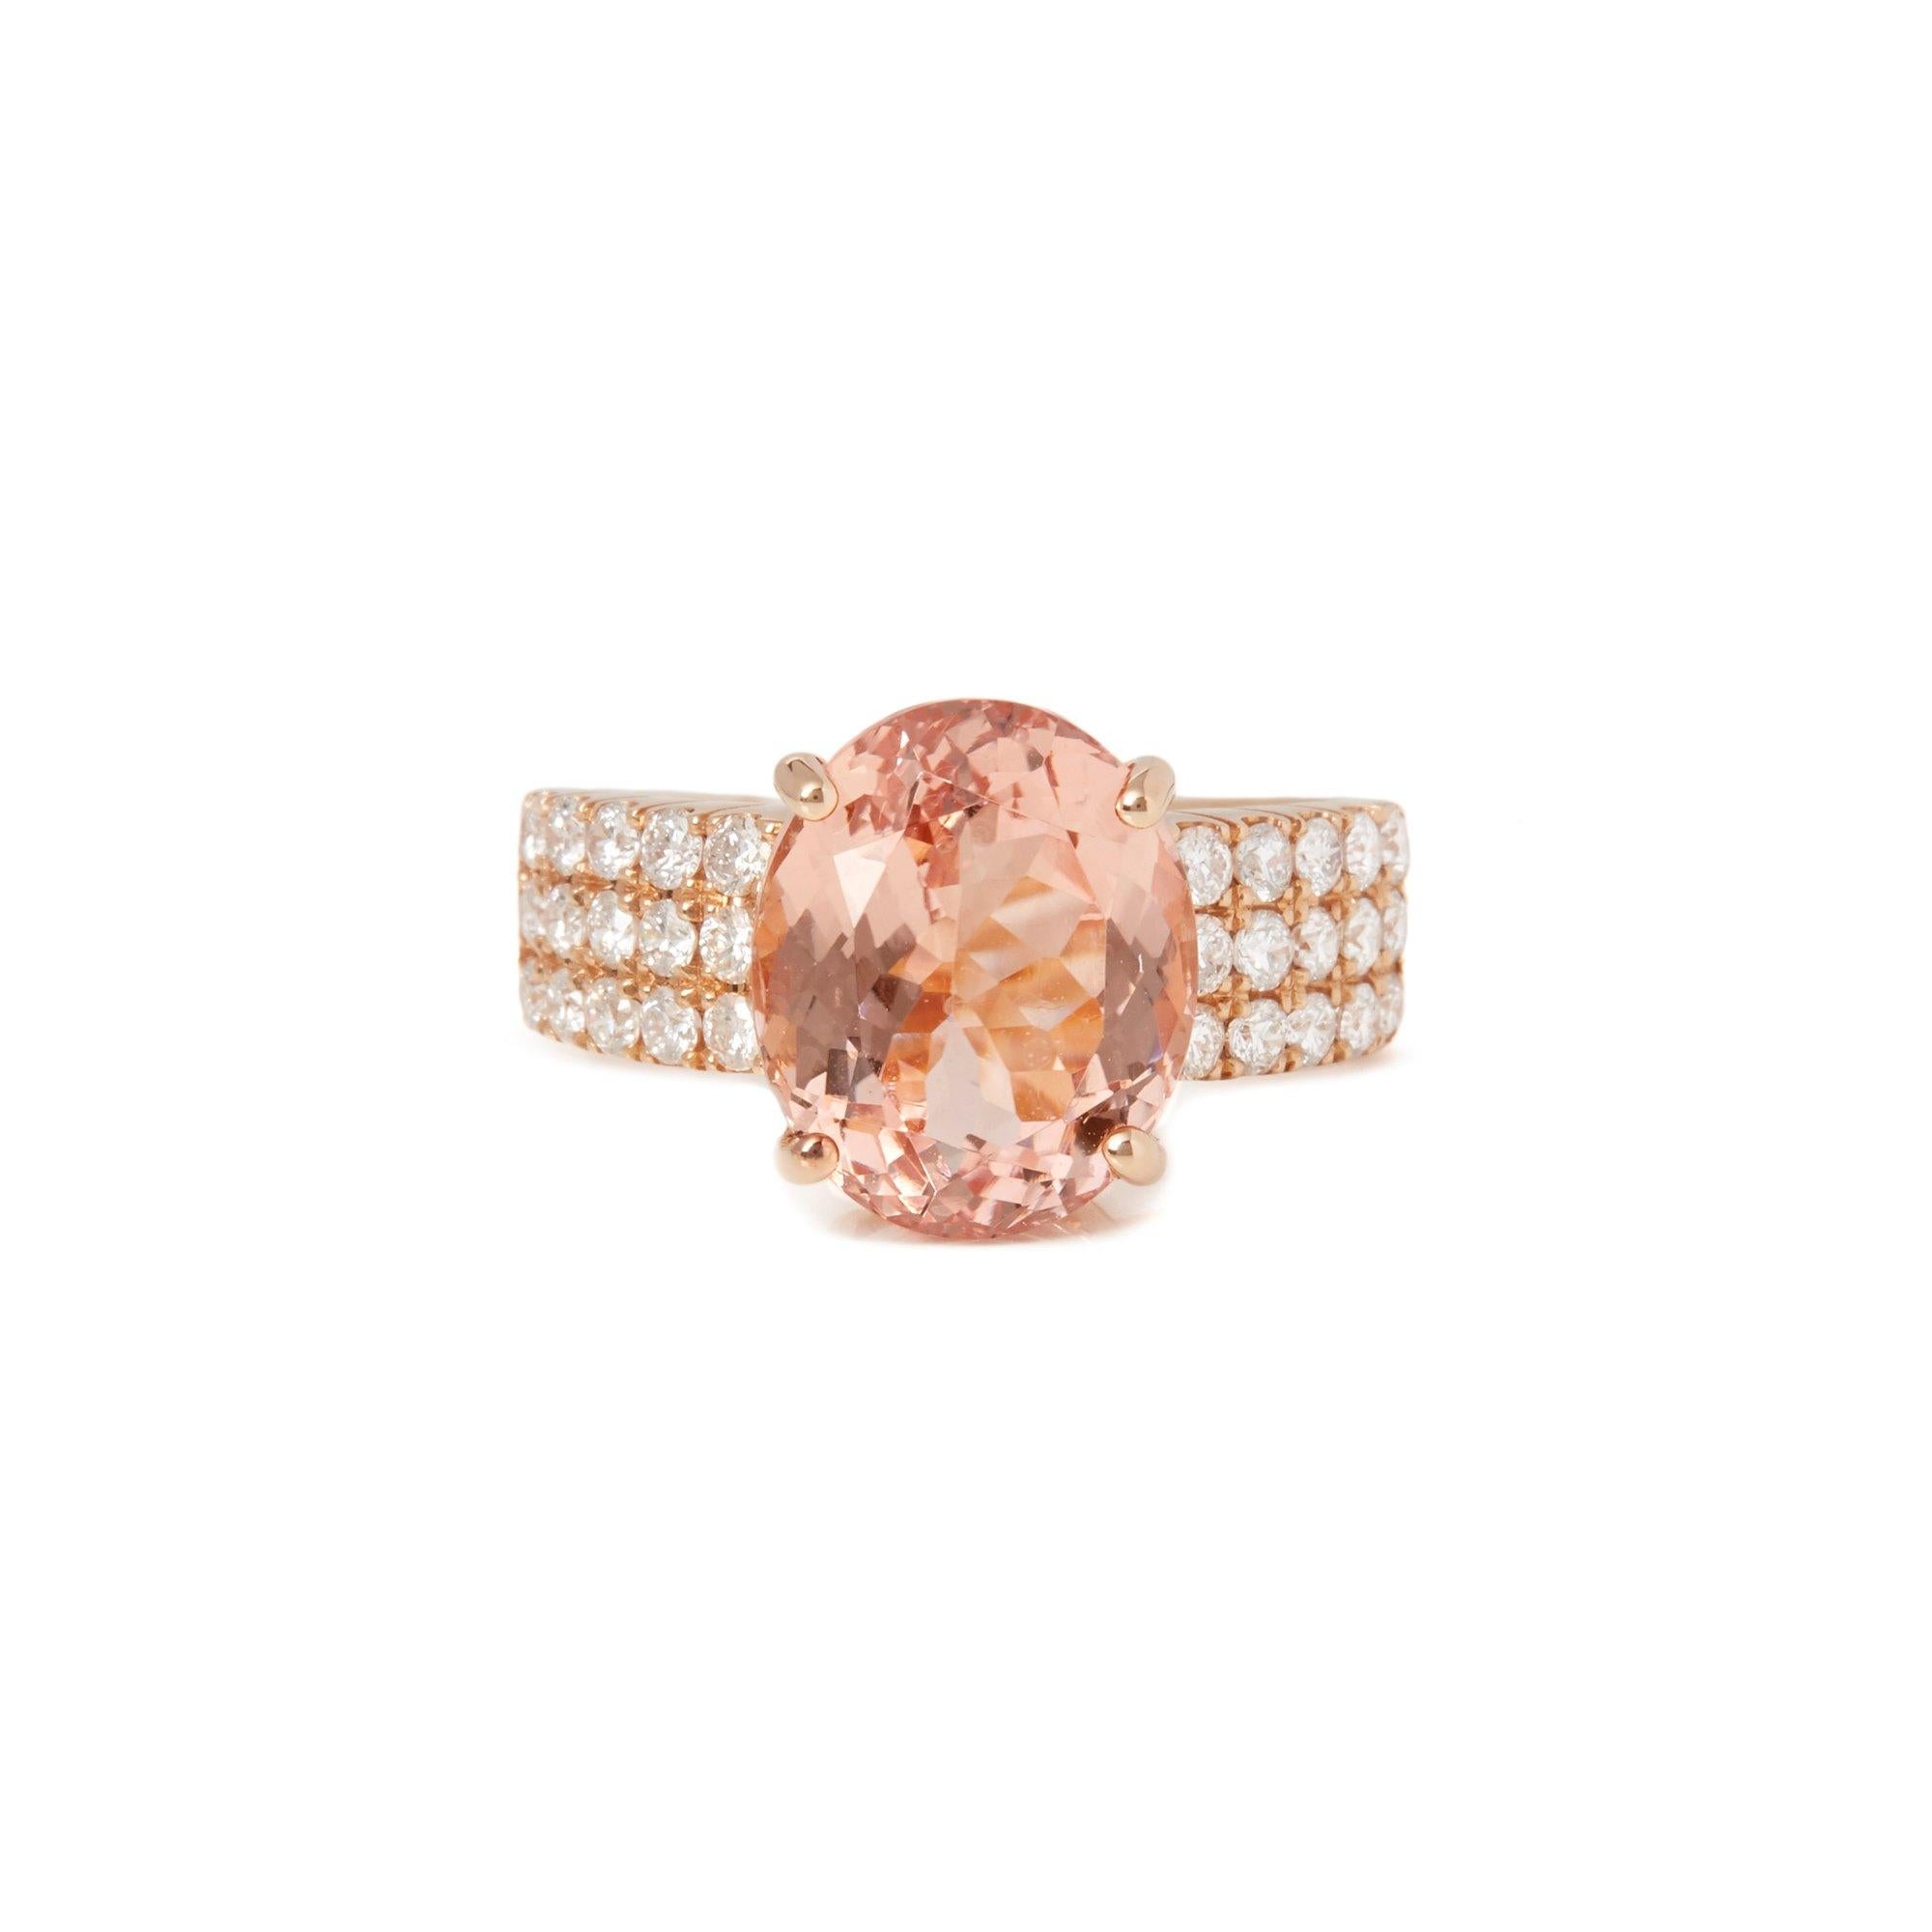 This ring designed by David Jerome is from his private collection and features one oval cut Morganite totalling 5.46cts sourced in Brazil. Set with round brilliant cut diamonds totalling 0.75cts mounted in an 18k rose gold setting. Finger size UK N,